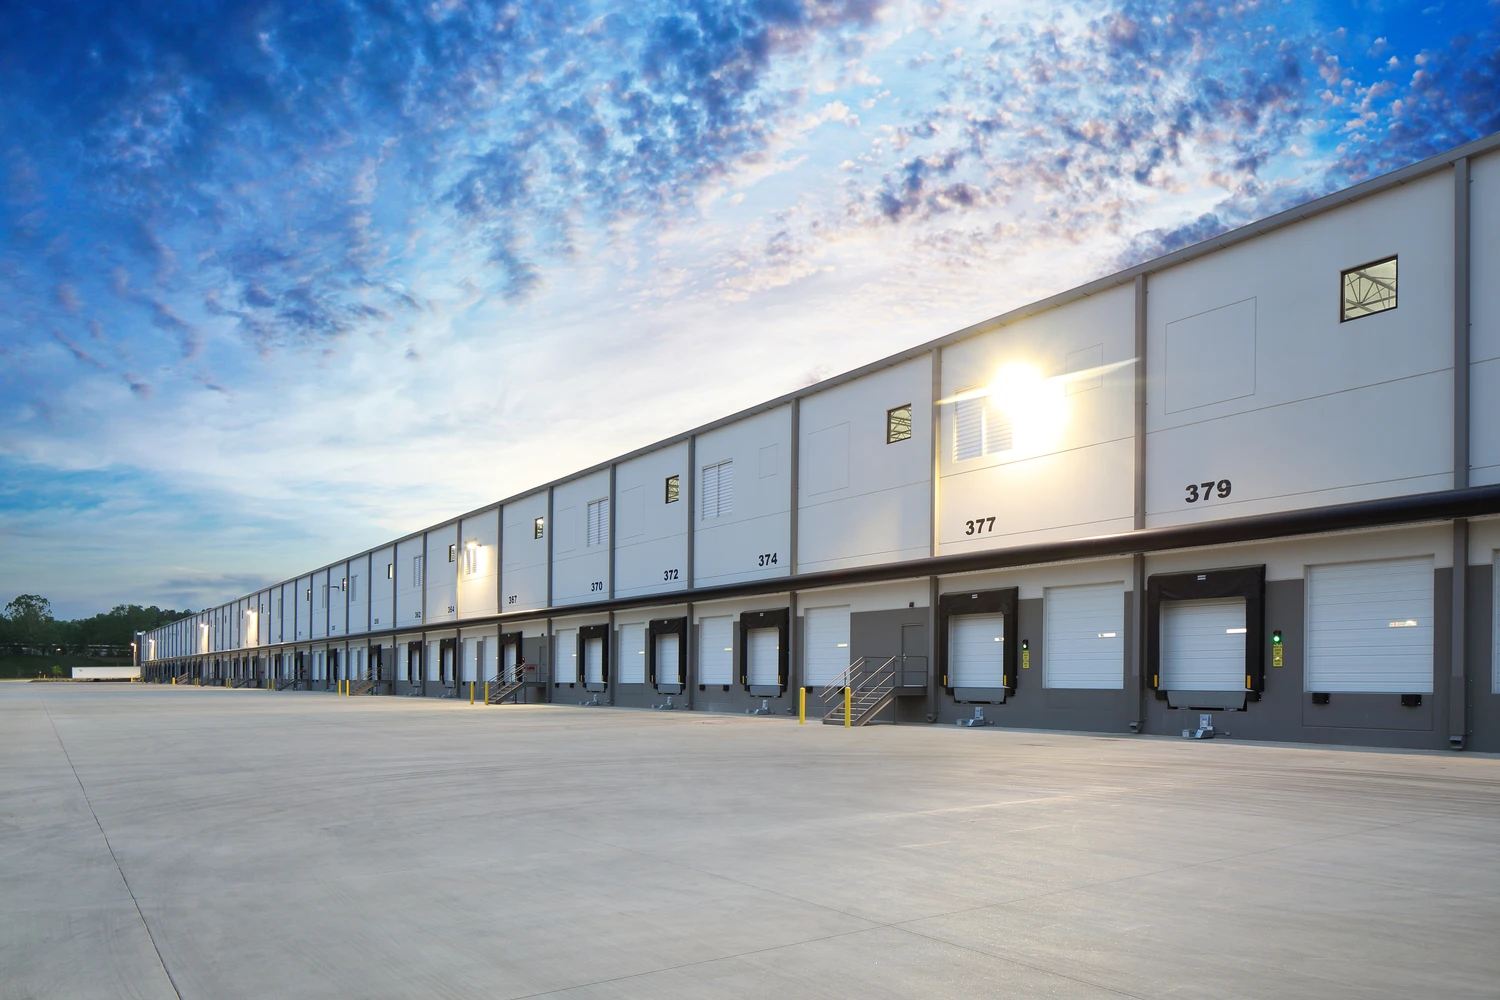 Distribution center located in the United States